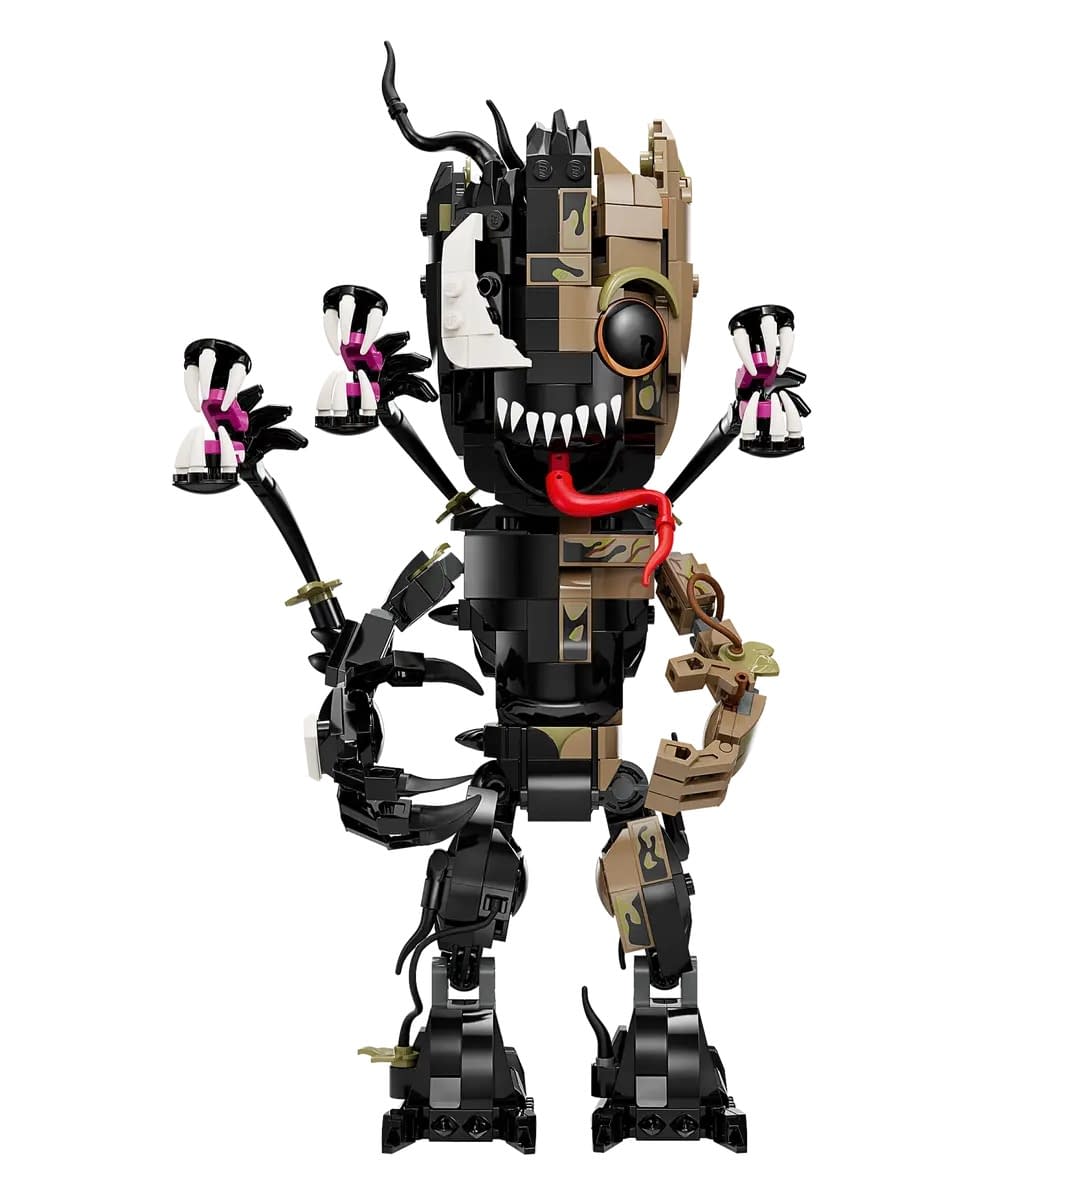 Marvel Comics Venomized Groot Comes to Life with New LEGO Set